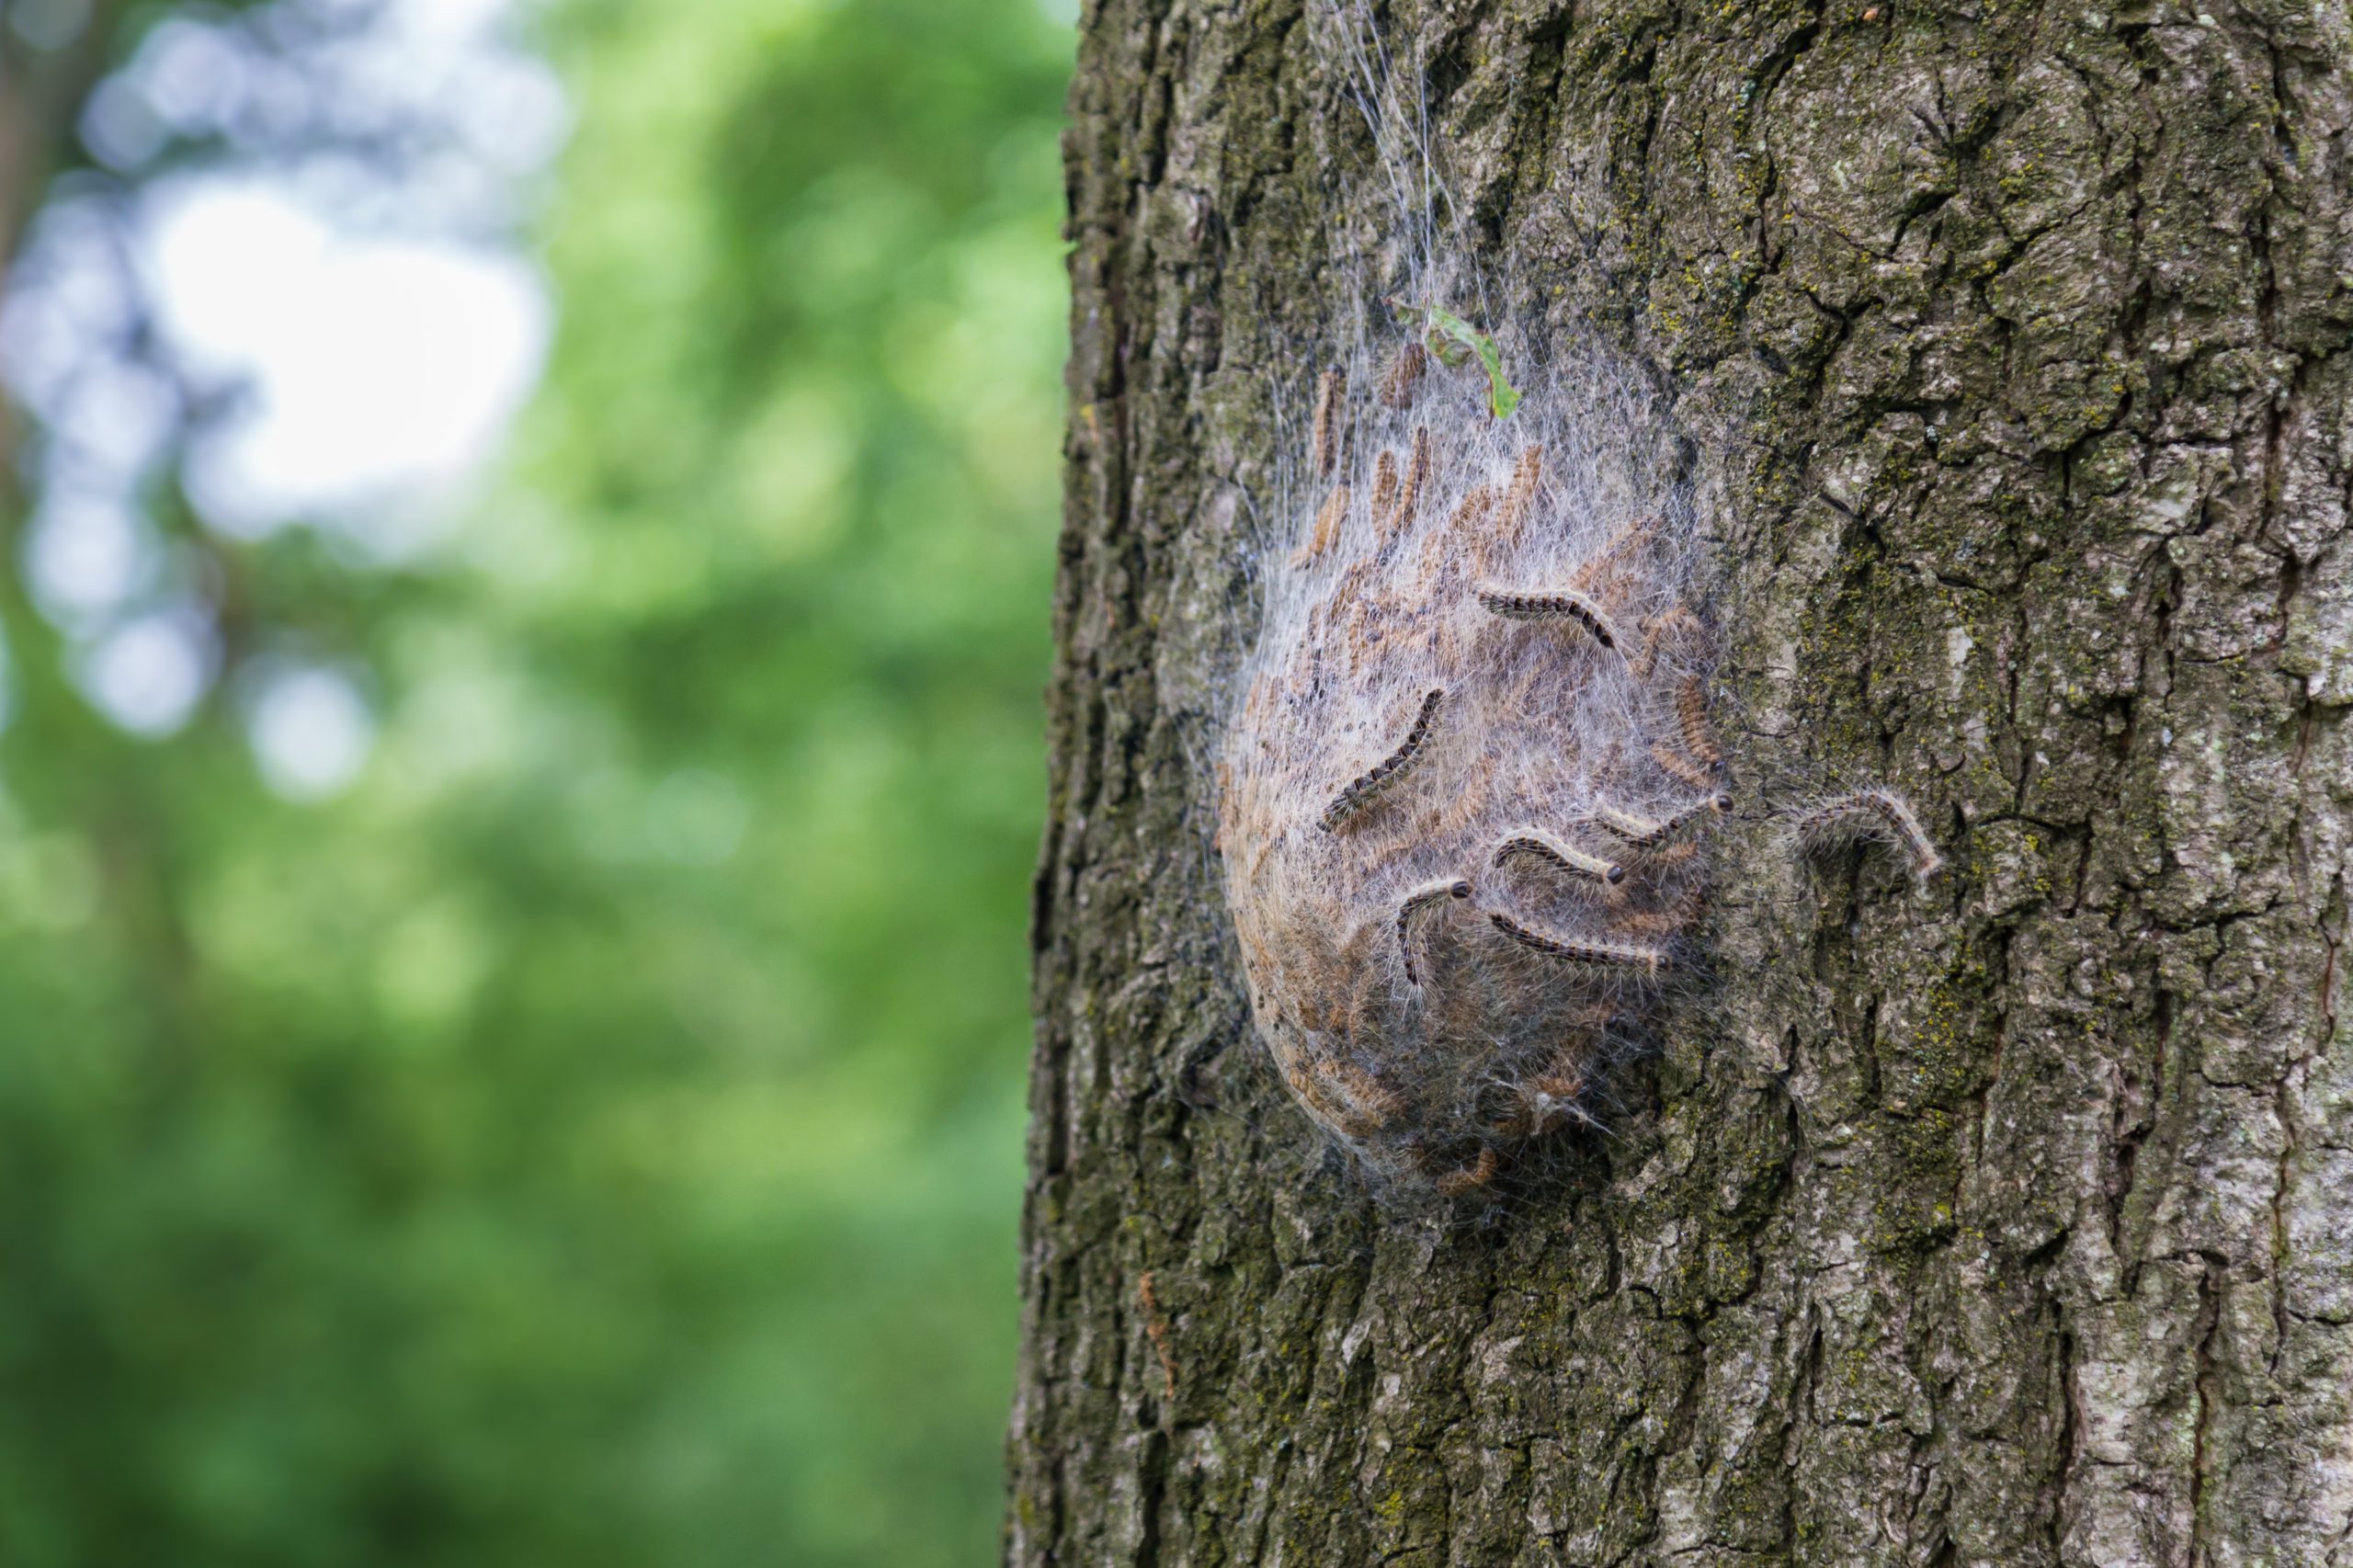 Public urged to keep watch for tree pest oak processionary moth | Envirotec